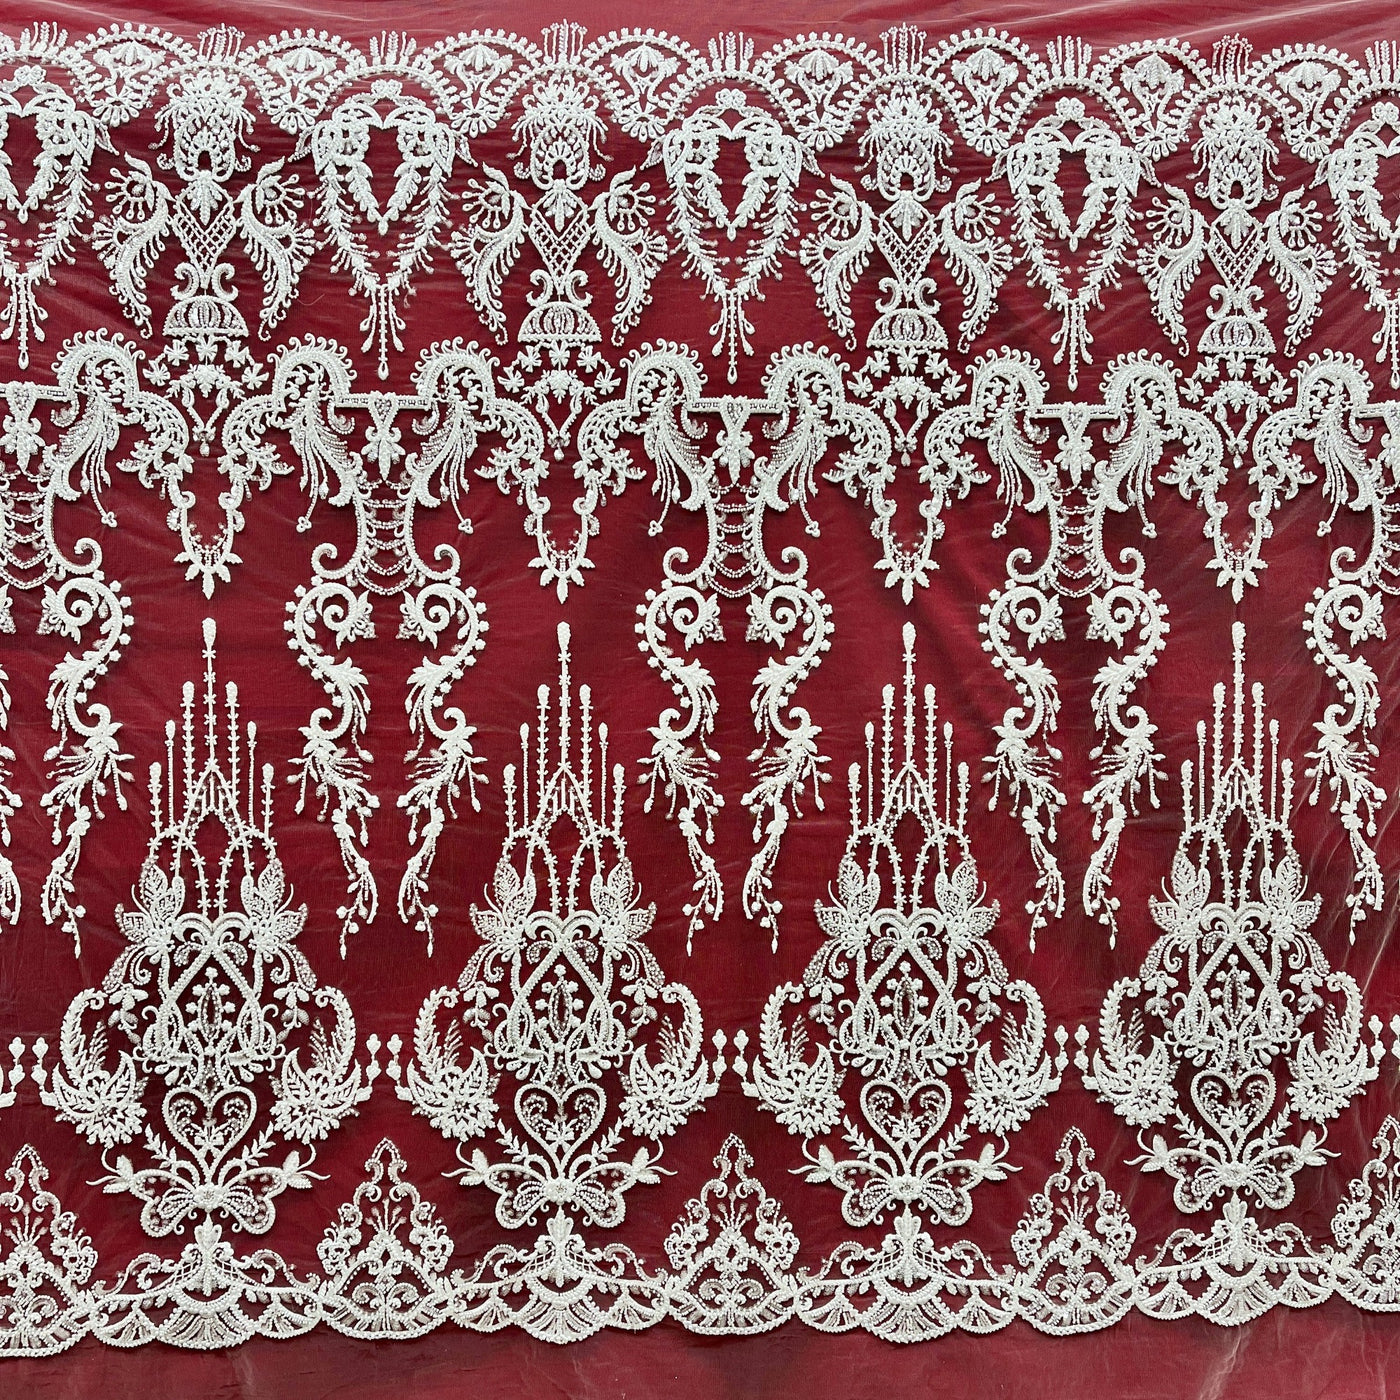 Beaded Lace Fabric Embroidered on 100% Polyester Net Mesh | Lace USA - GD-237189 White